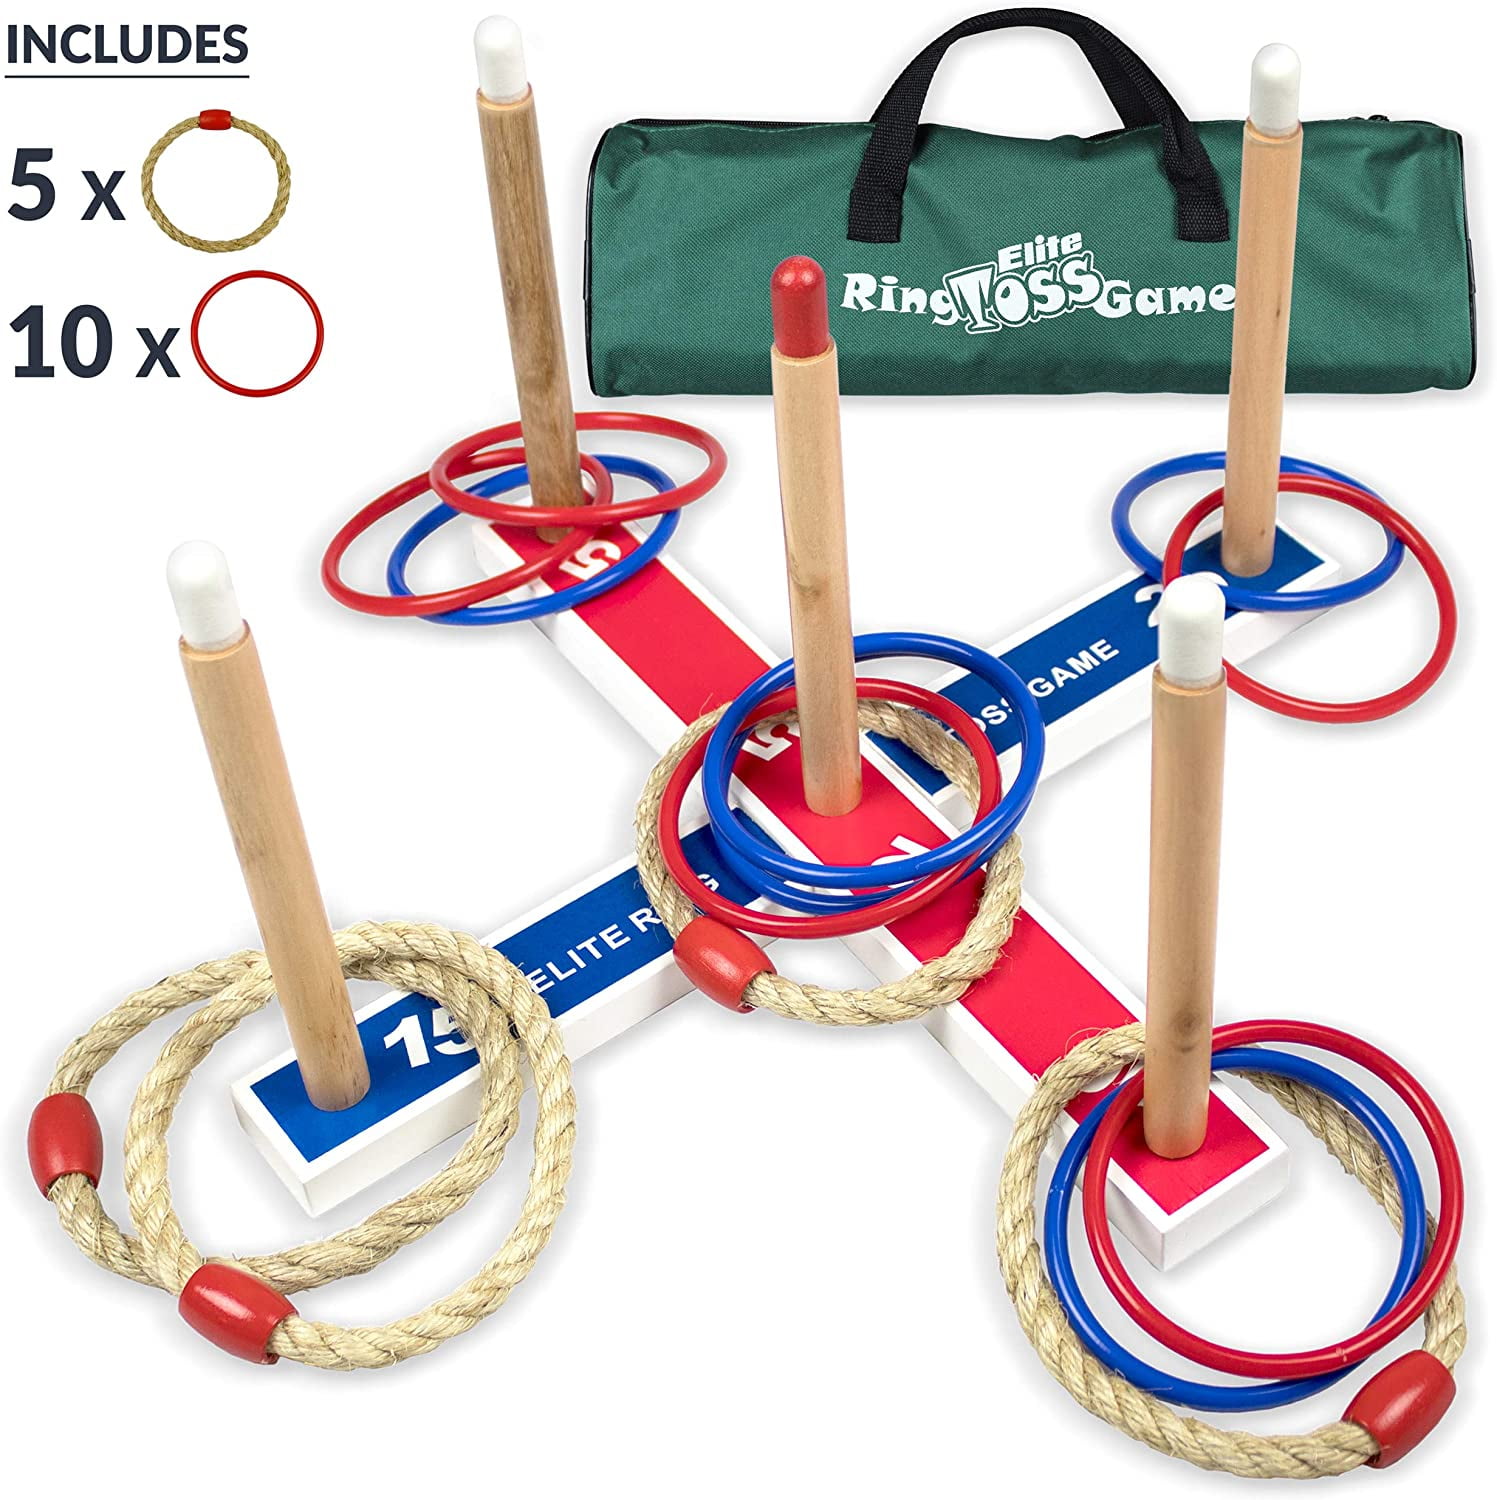 Elite Outdoor Games For Kids - Ring Toss Yard Games for Adults and Family. Easy Backyard Games to Assemble, With Compact Carry Bag for Easy Storage. Fun Kids Games or Outdoor Toys for Kids